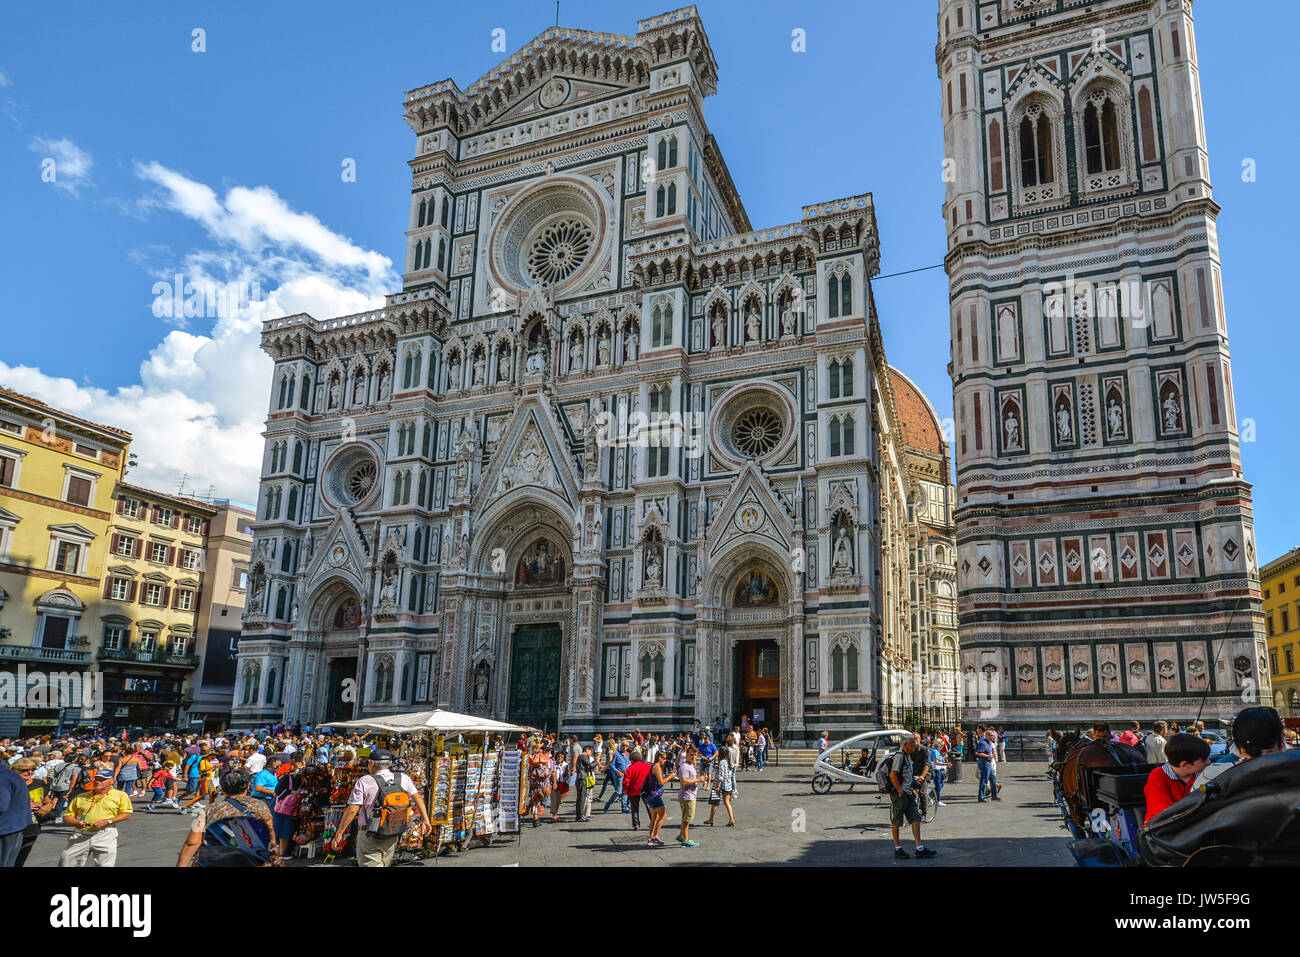 The duomo, Florence Cathedral and Giotto's Campanile in the Piazza del Duomo in the historic center of Florence Italy with tourists and souvenir stand Stock Photo